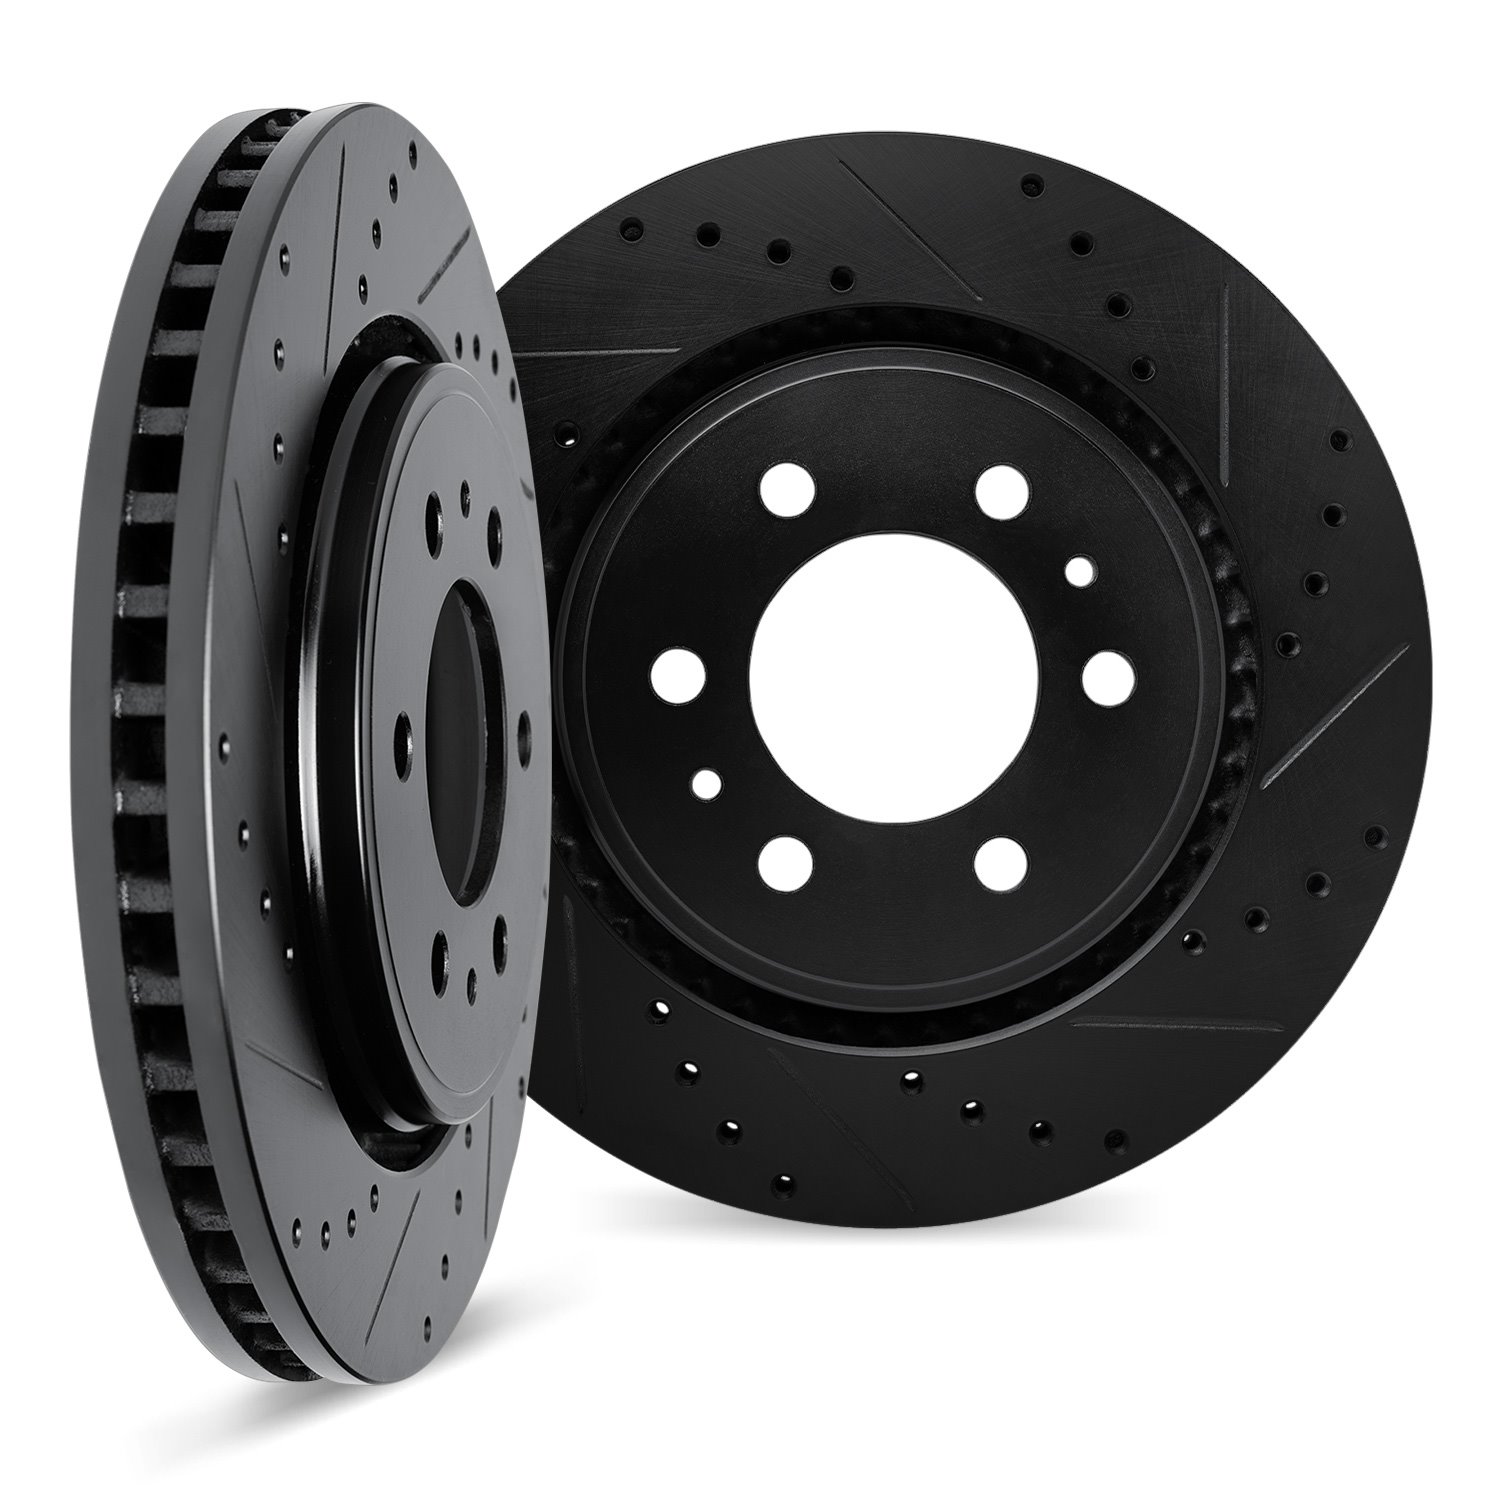 8002-54181 Drilled/Slotted Brake Rotors [Black], Fits Select Ford/Lincoln/Mercury/Mazda, Position: Front